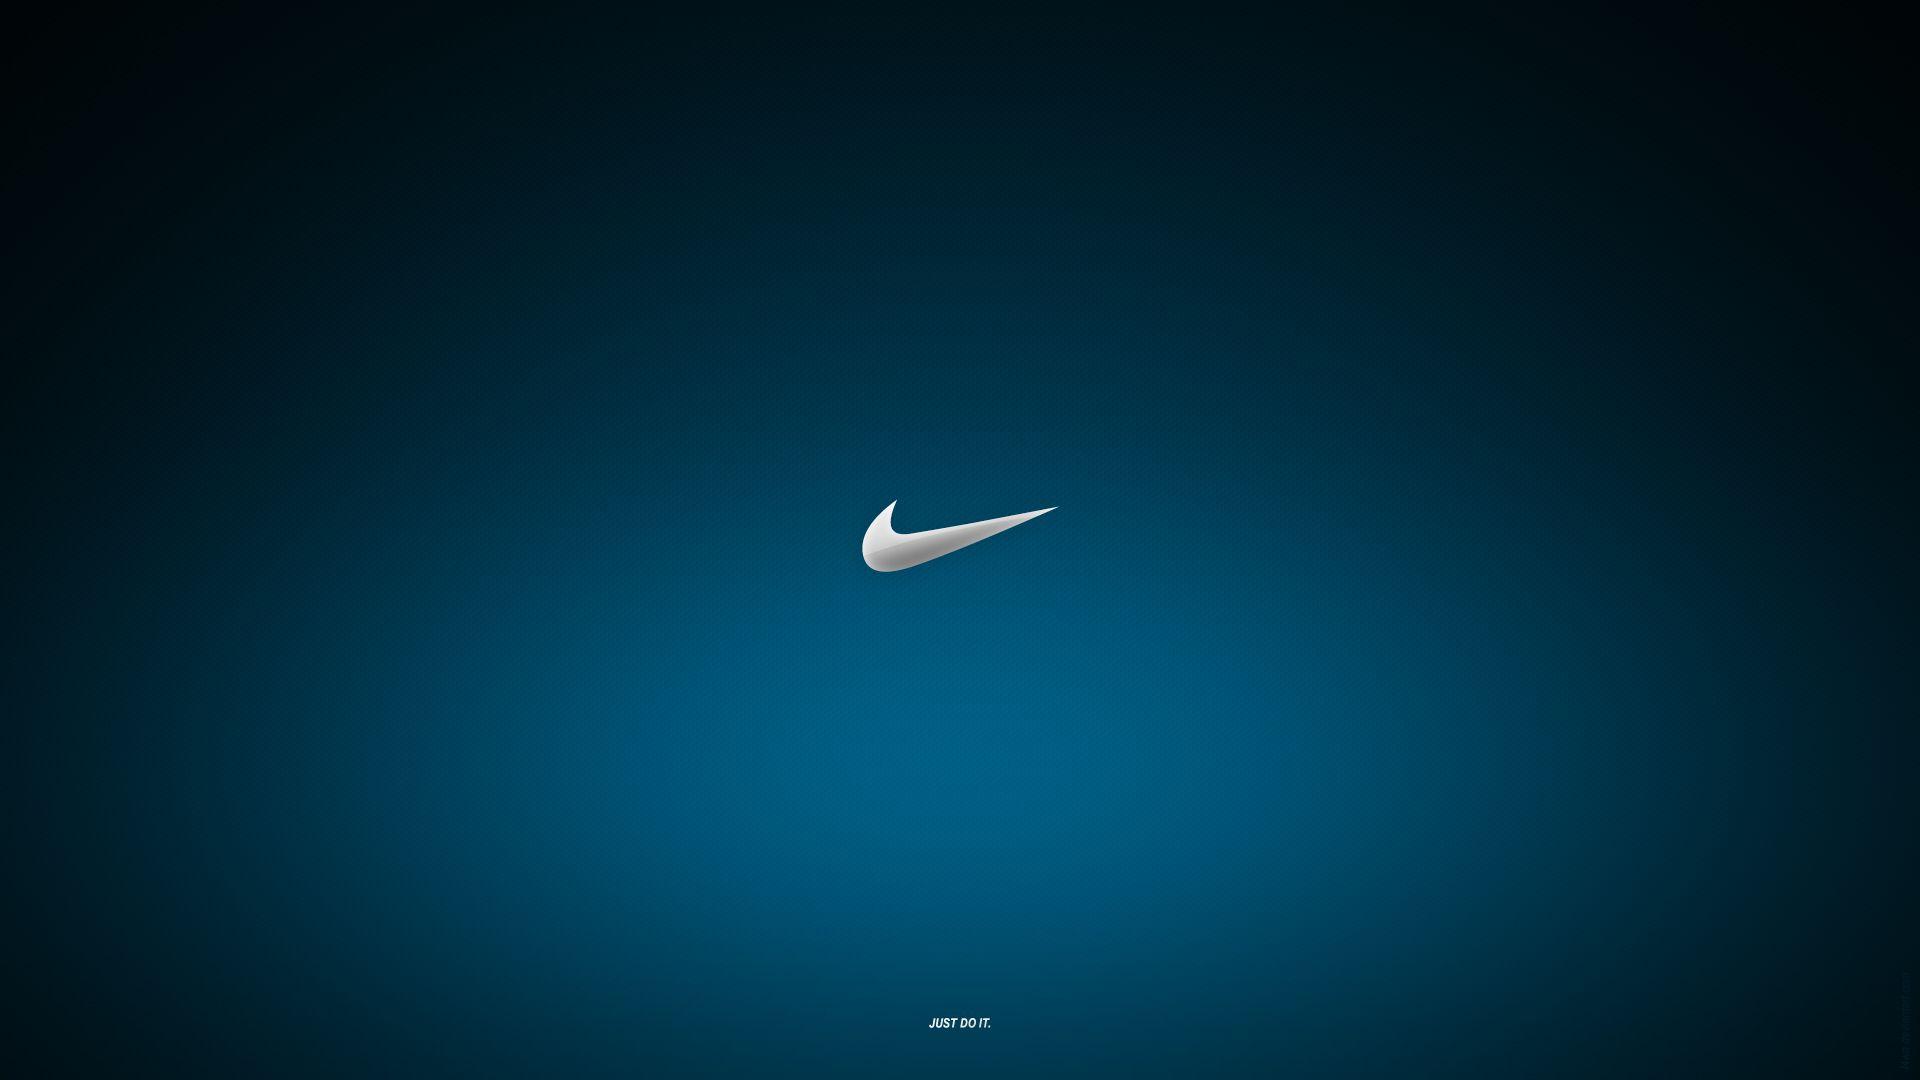 🔥 NIKE' Wallpaper HD 4K 😍 for PC - Free Download & Install on